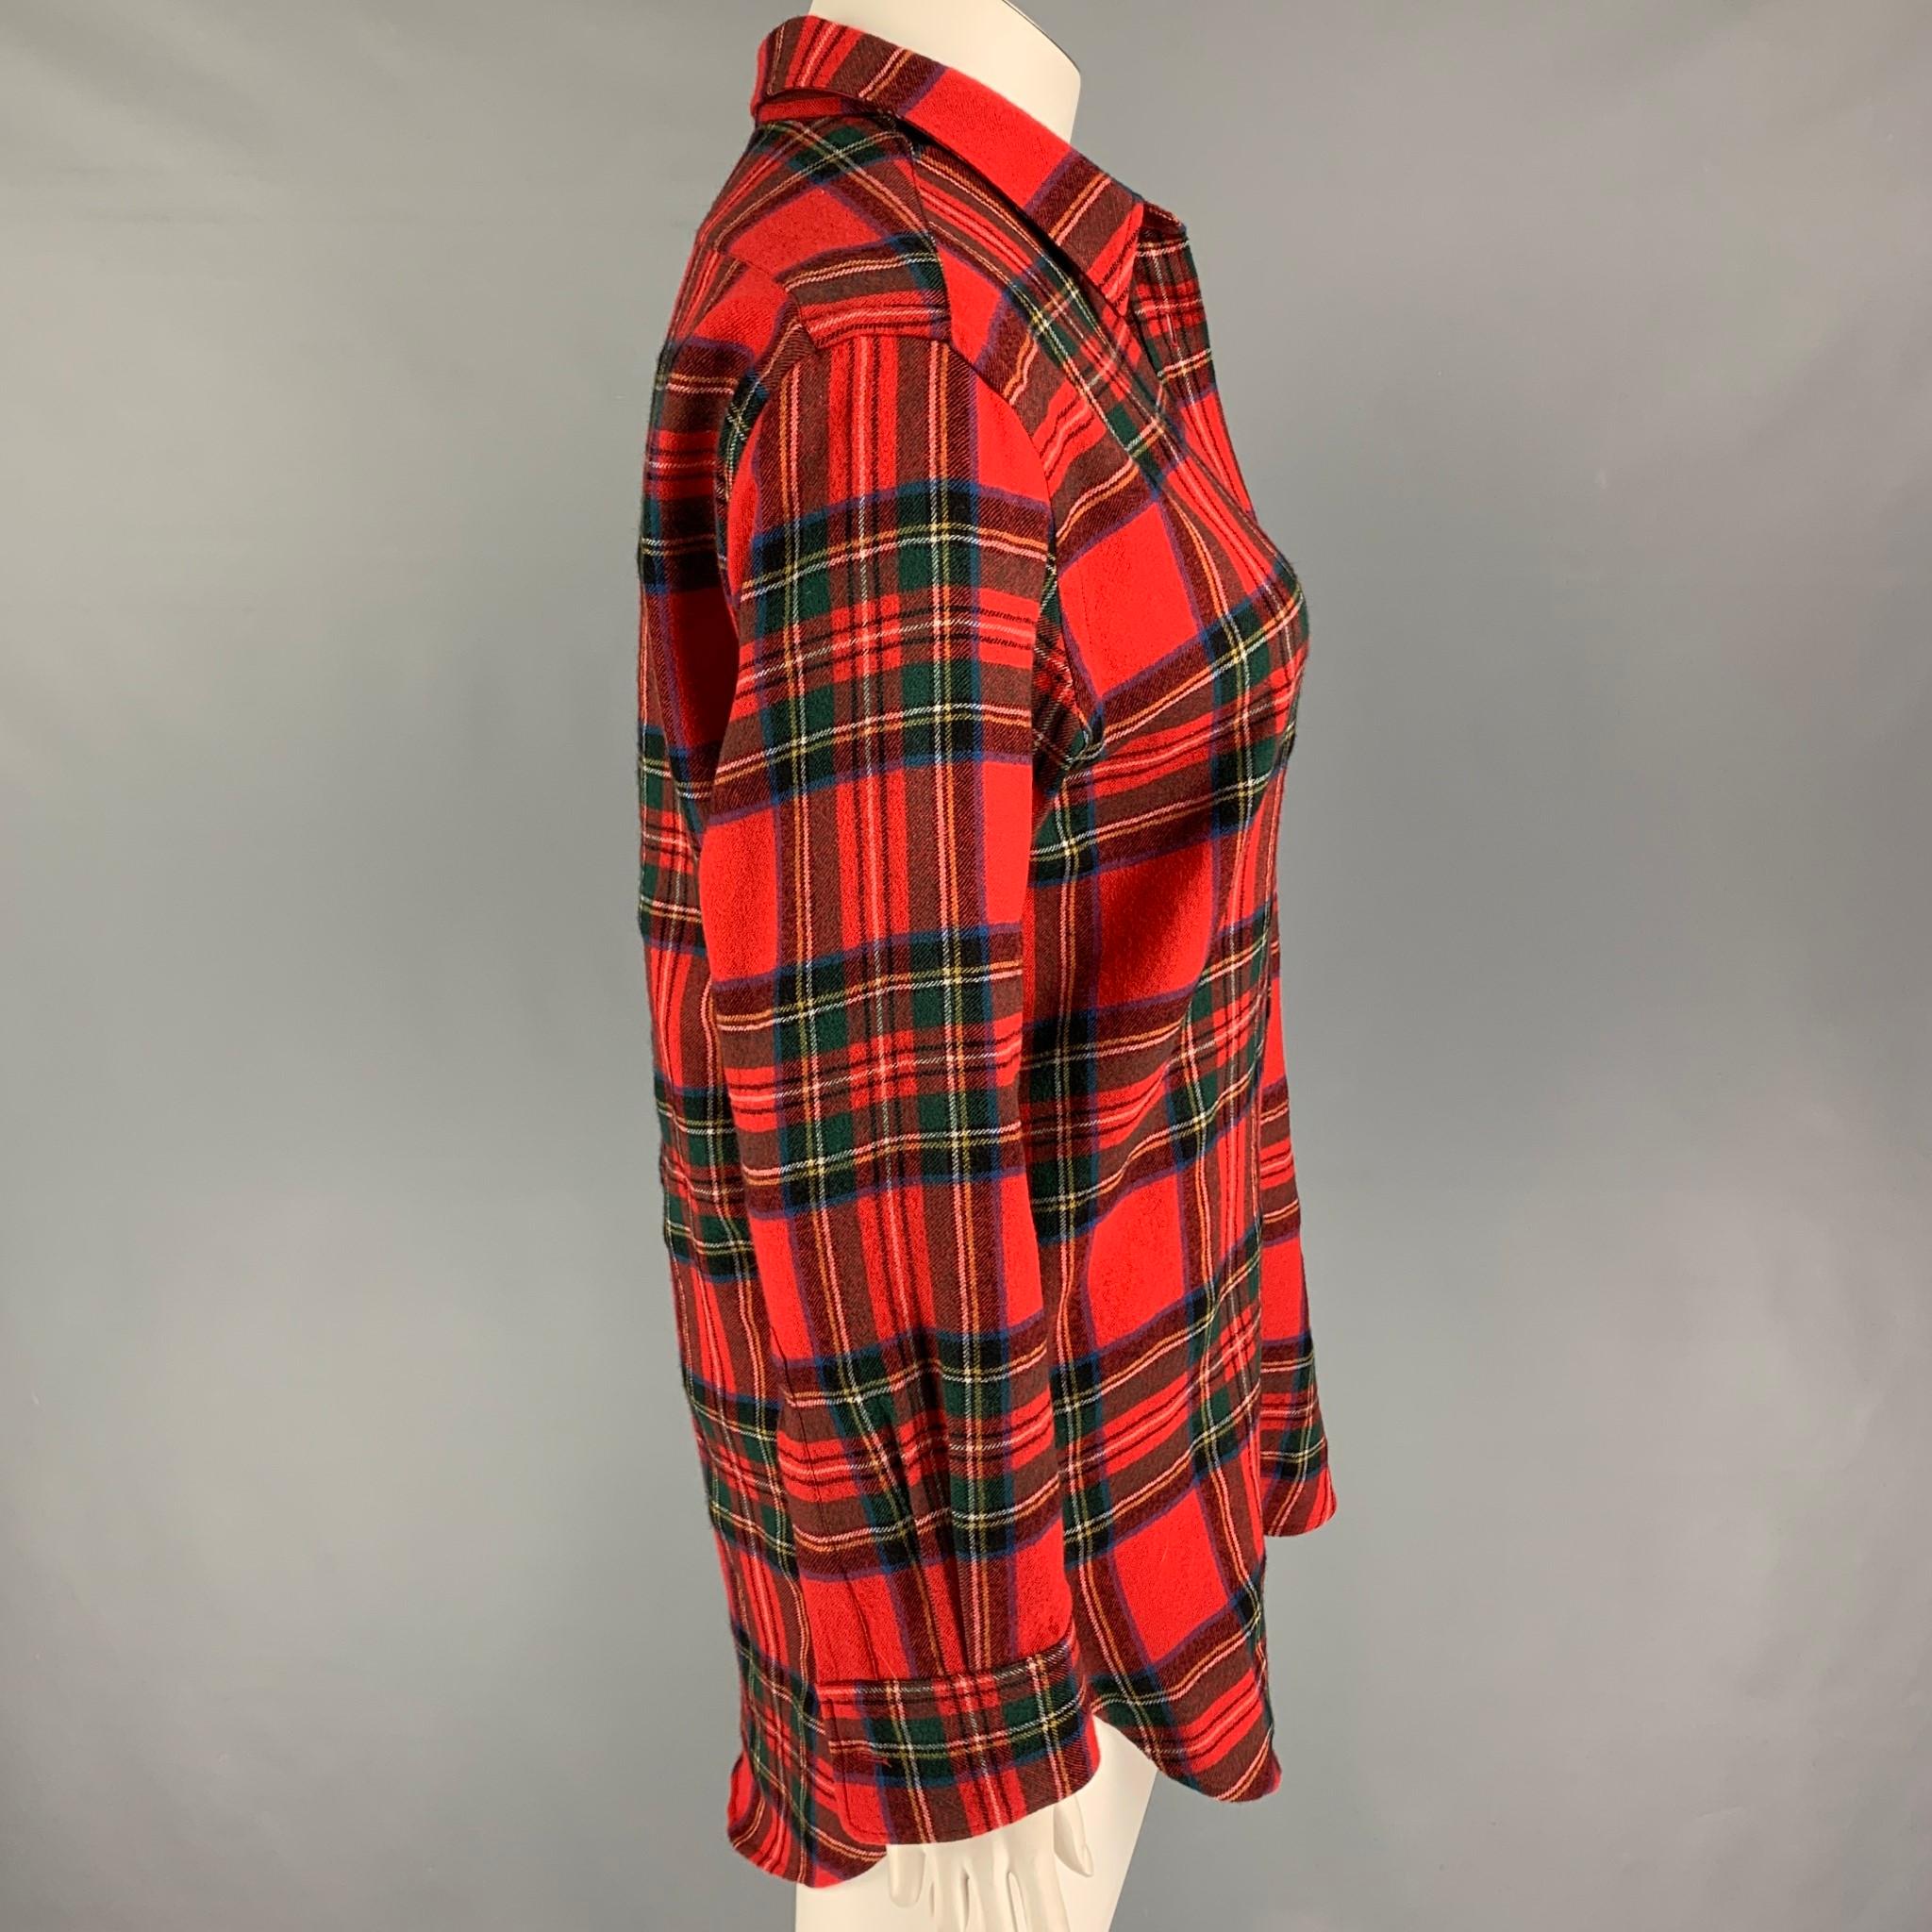 BURBERRY long sleeve shirt comes in a multi-color plaid wool featuring a spread collar, patch pocket, and a button up closure. 

Very Good Pre-Owned Condition.
Marked: UK 12 / US 10 / IT 44

Measurements:

Shoulder: 18 in.
Bust: 44 in.
Sleeve: 23.5